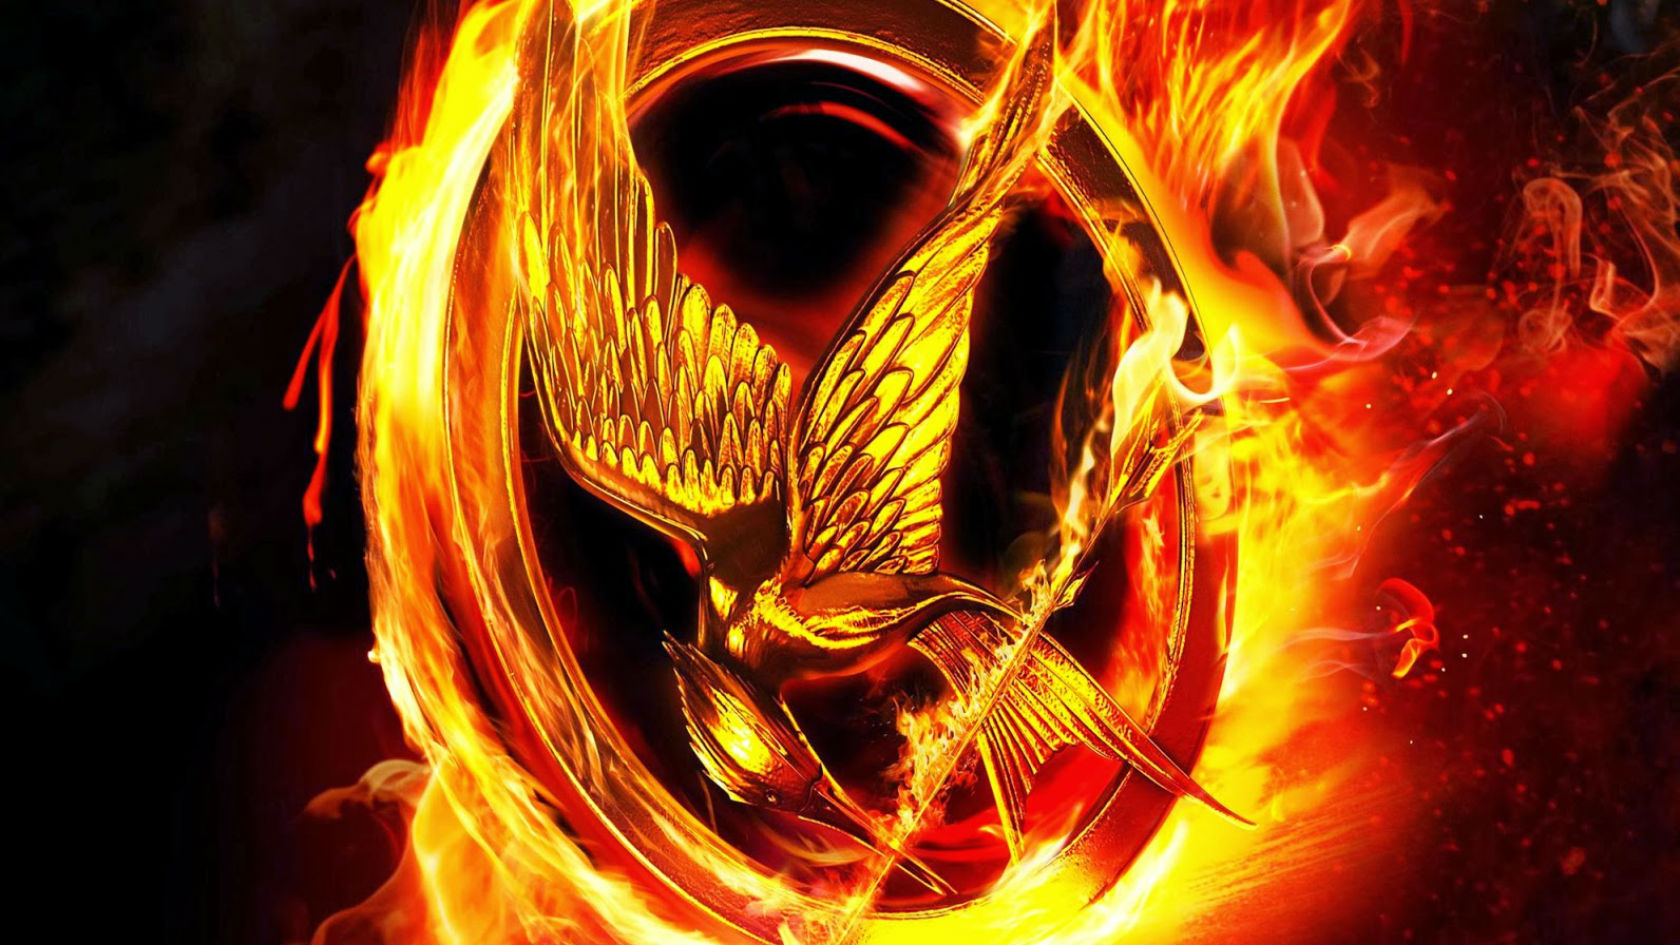 Watch The Trailer For 'The Hunger Games Mockingjay Part 1